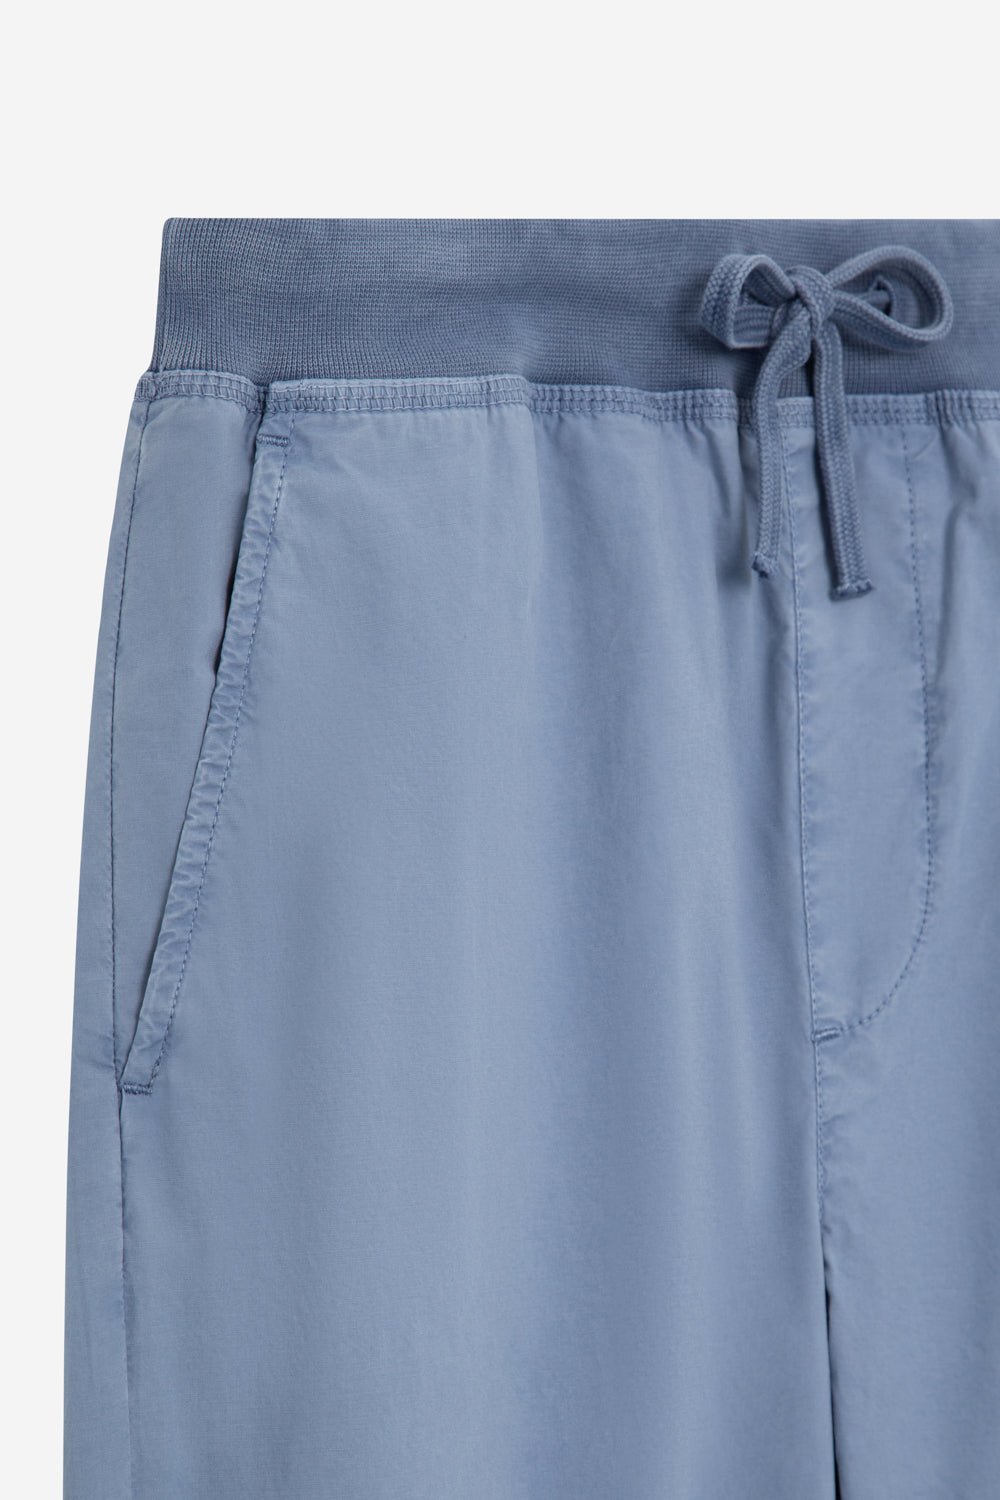 GANGES TROUSERS BLUE